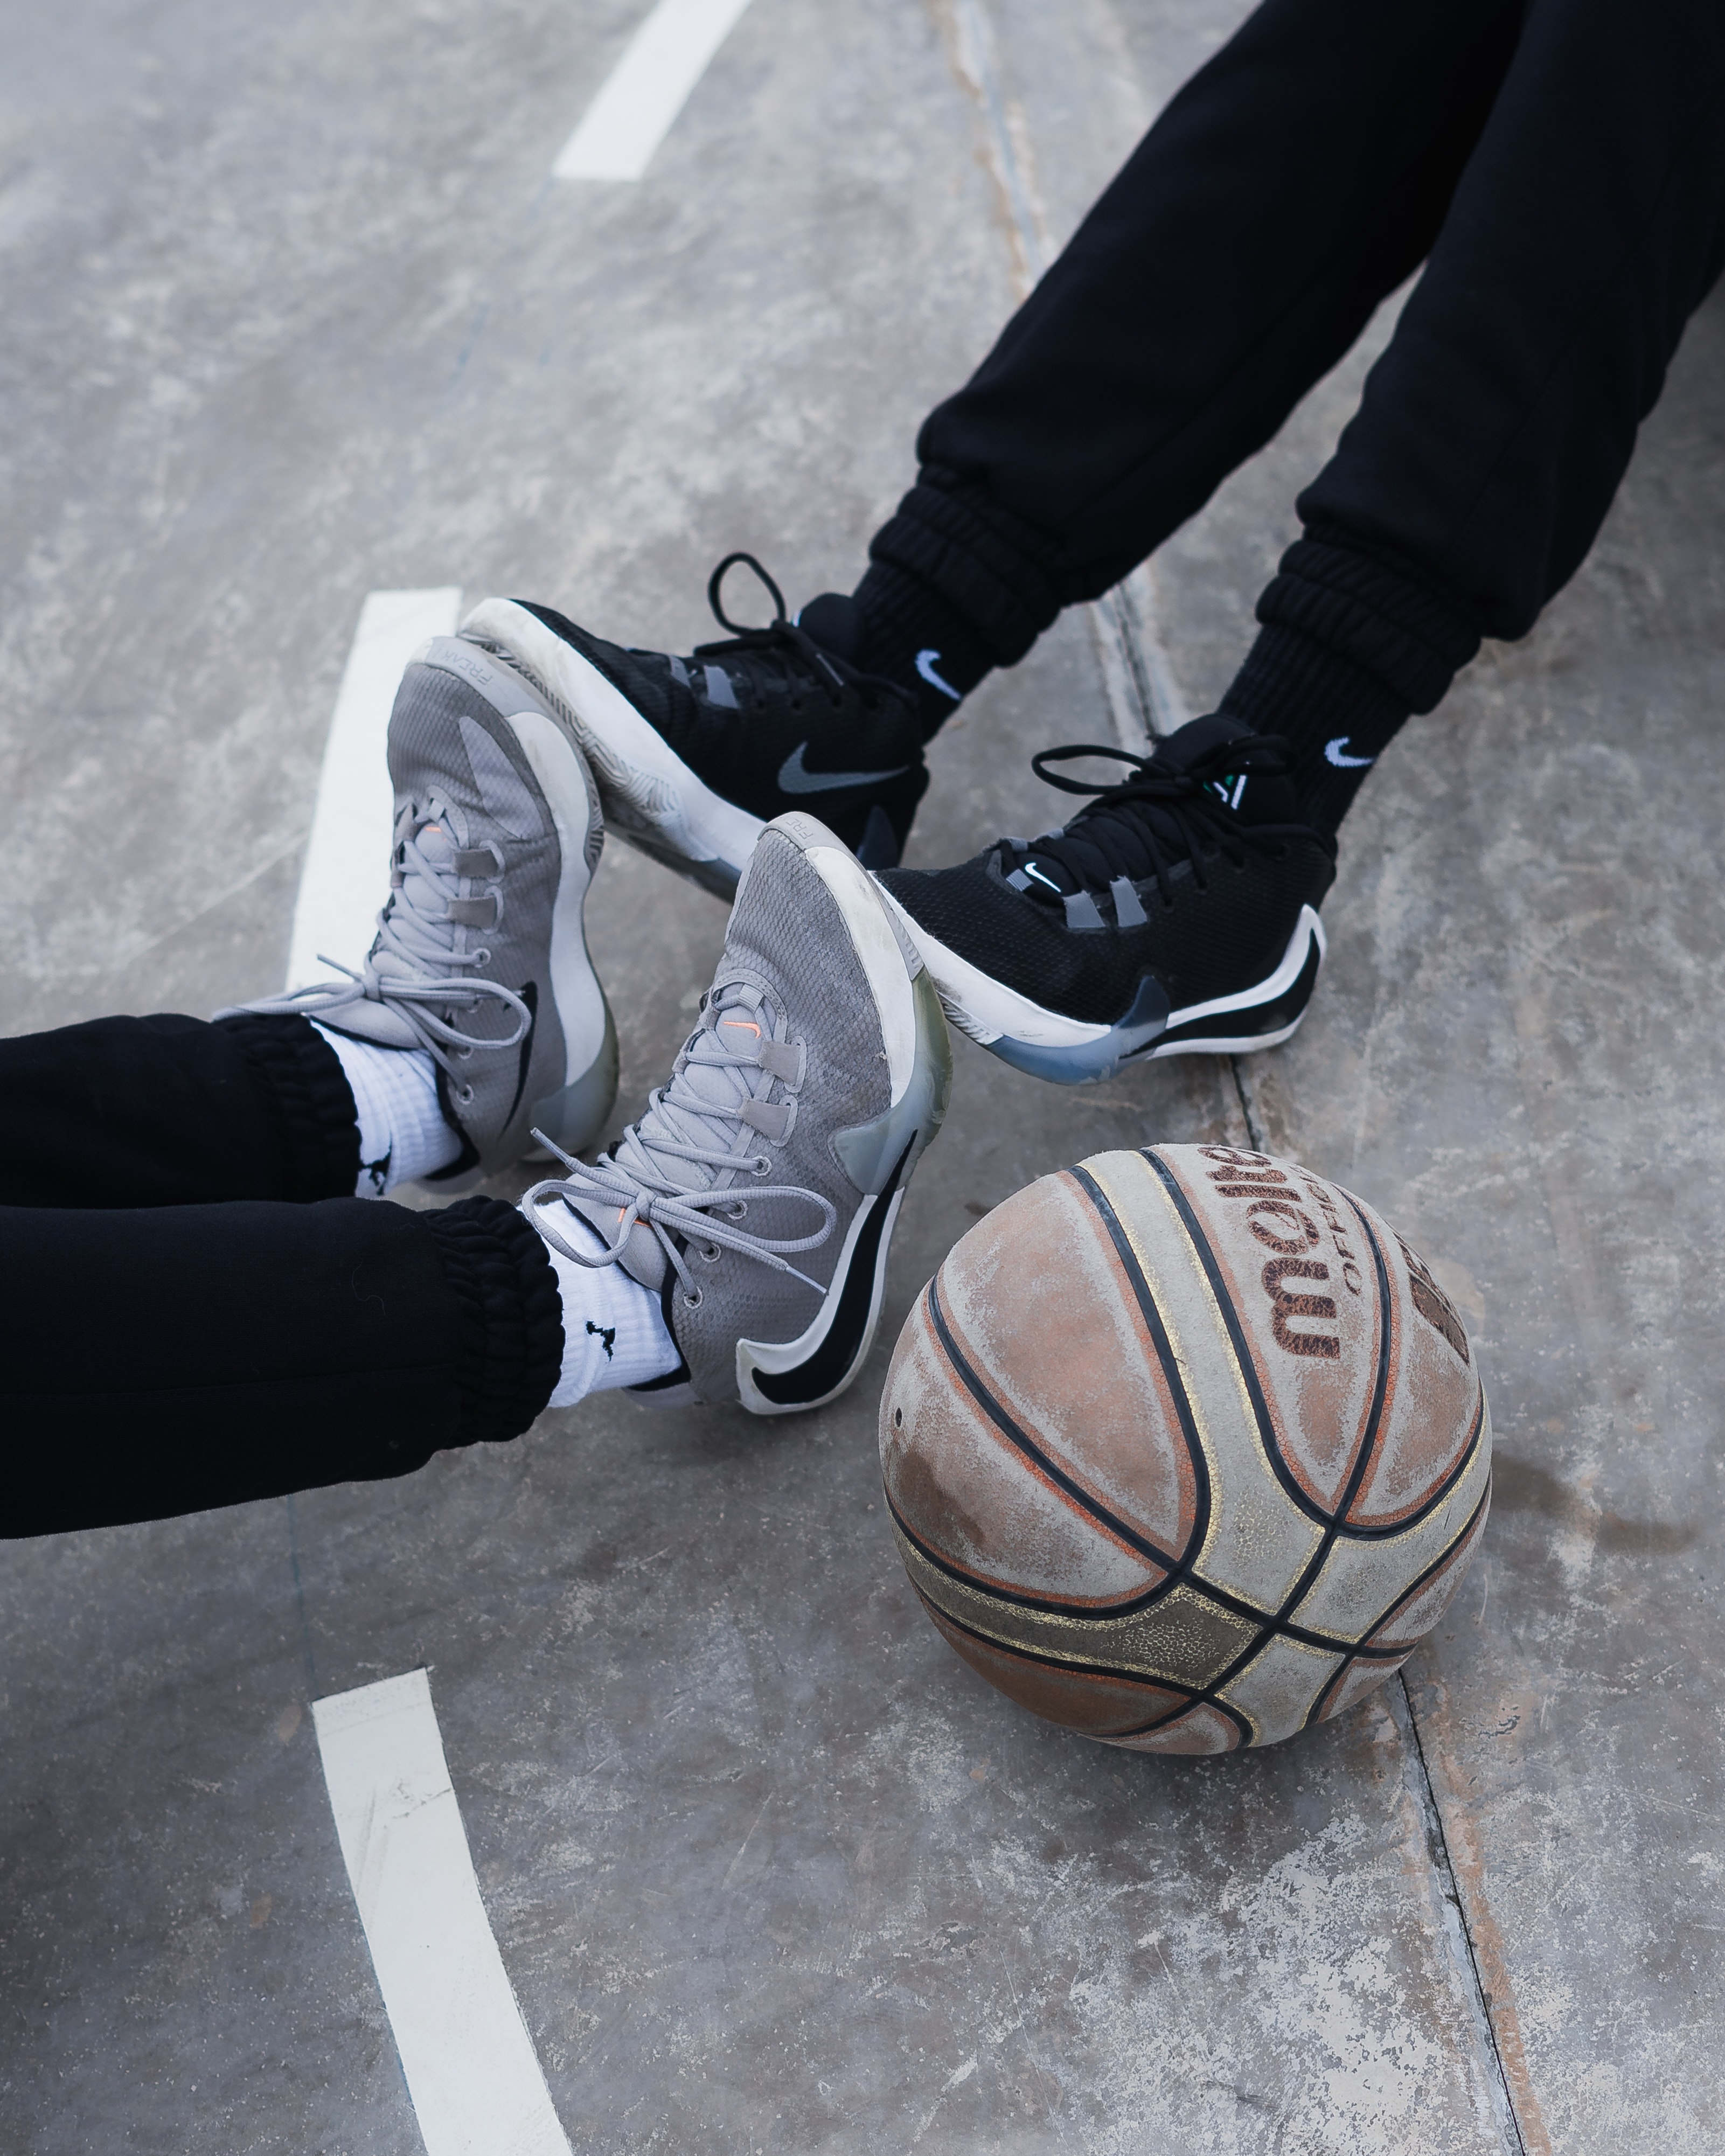 basketball, sneakers, sports, legs, ball High Definition image